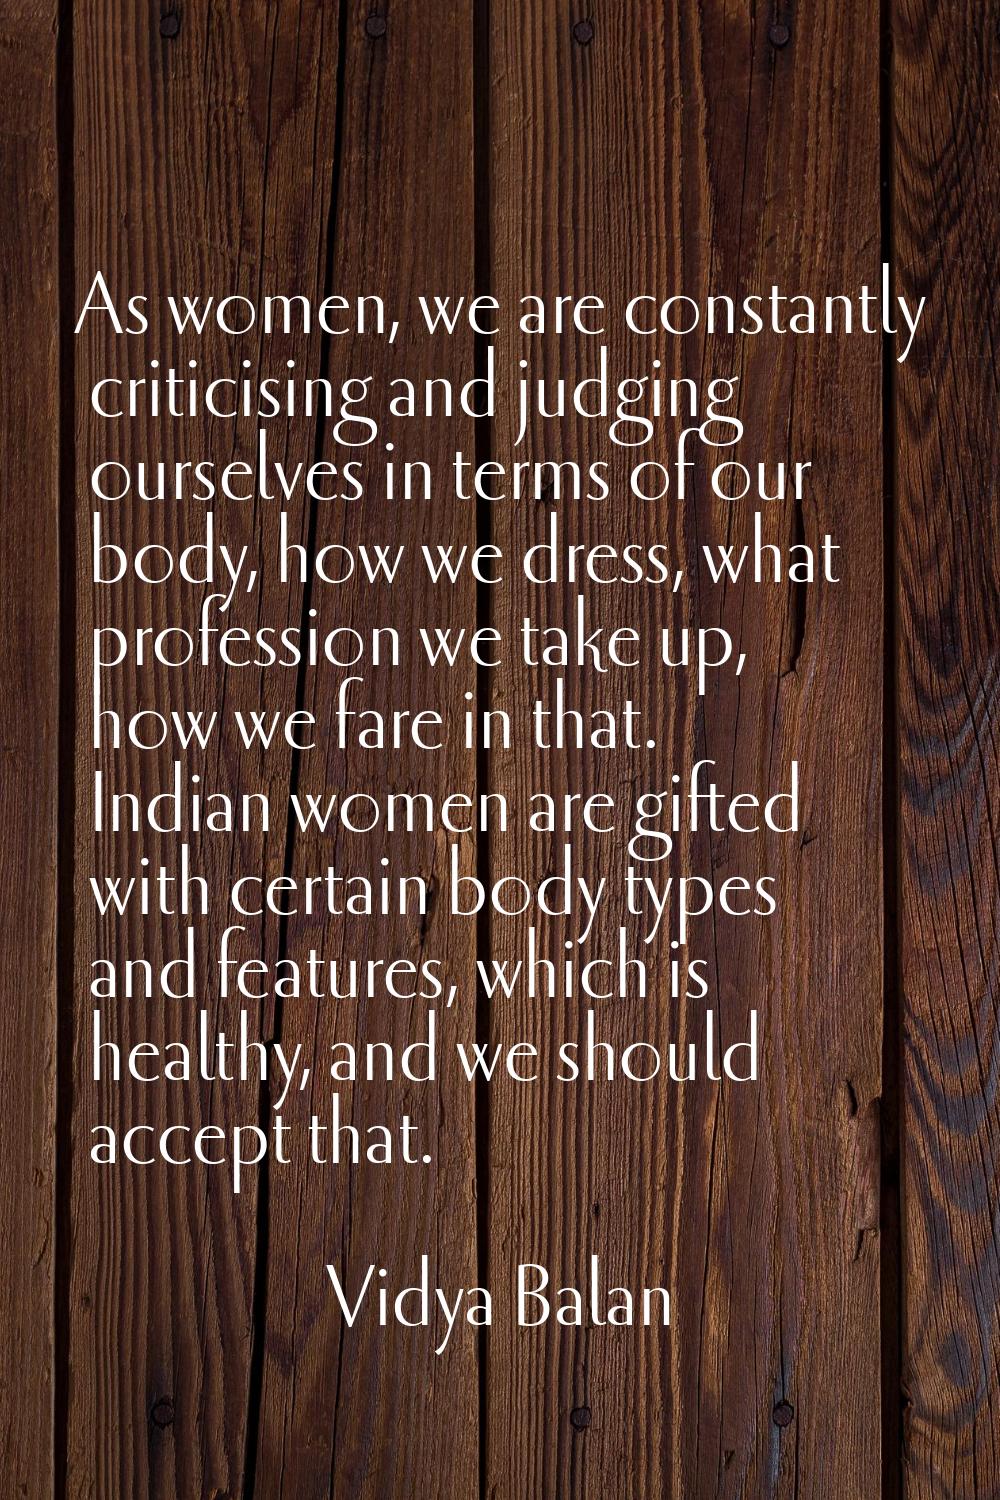 As women, we are constantly criticising and judging ourselves in terms of our body, how we dress, w